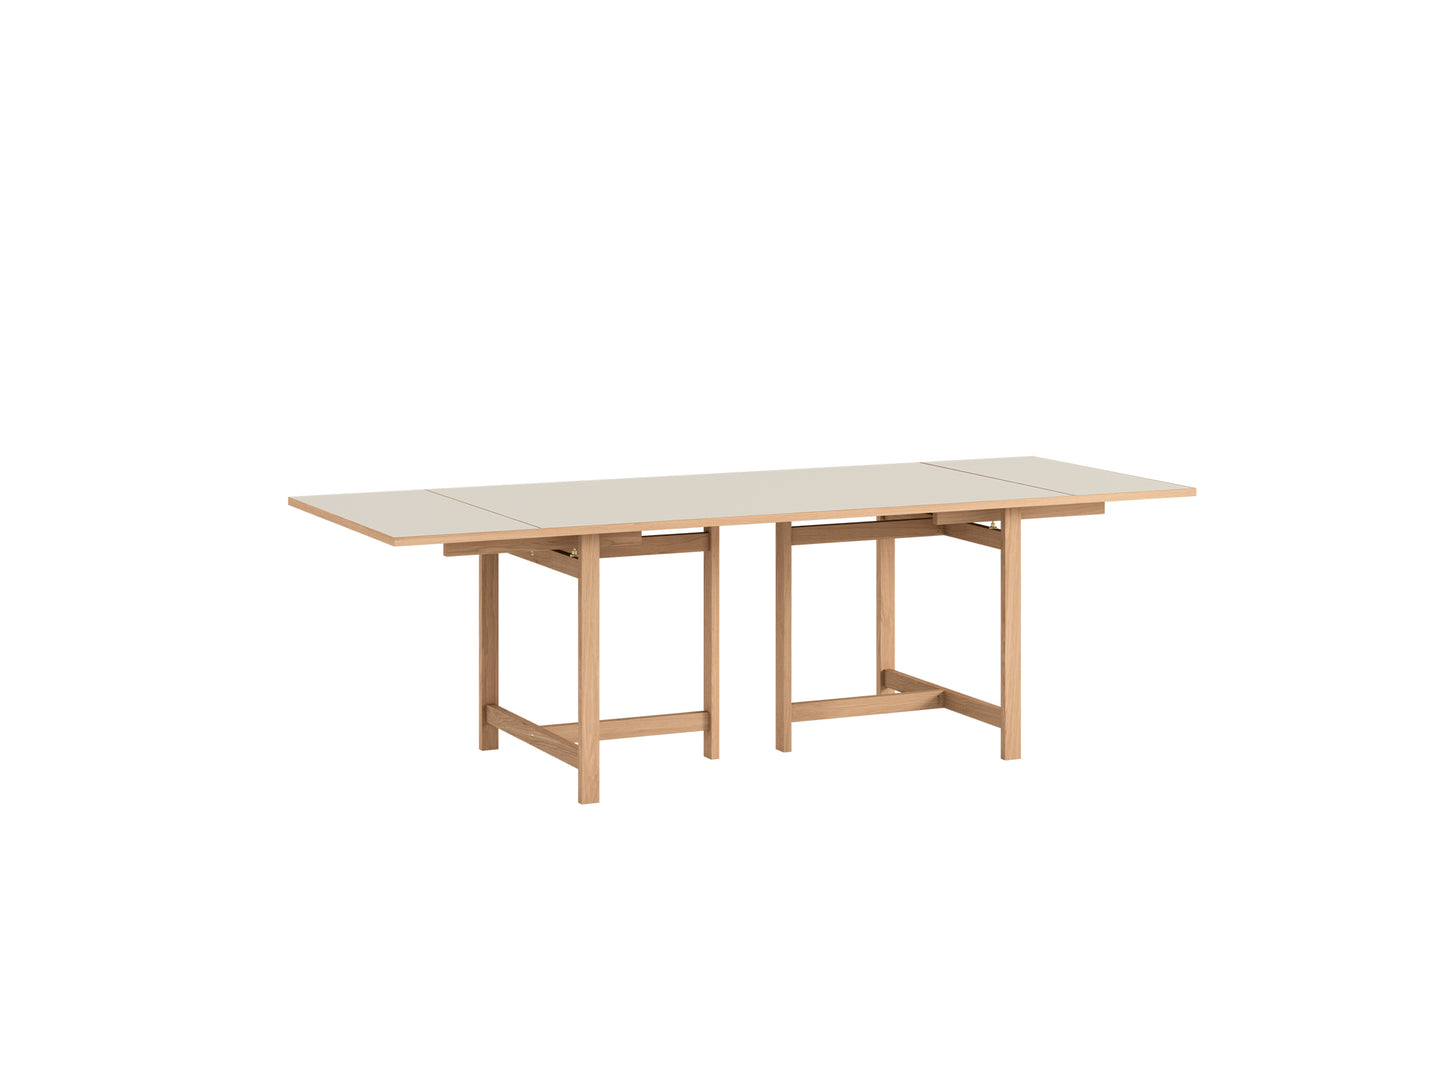 Rectangular Dining Table Extension Leaf by Moebe - Warm Beige